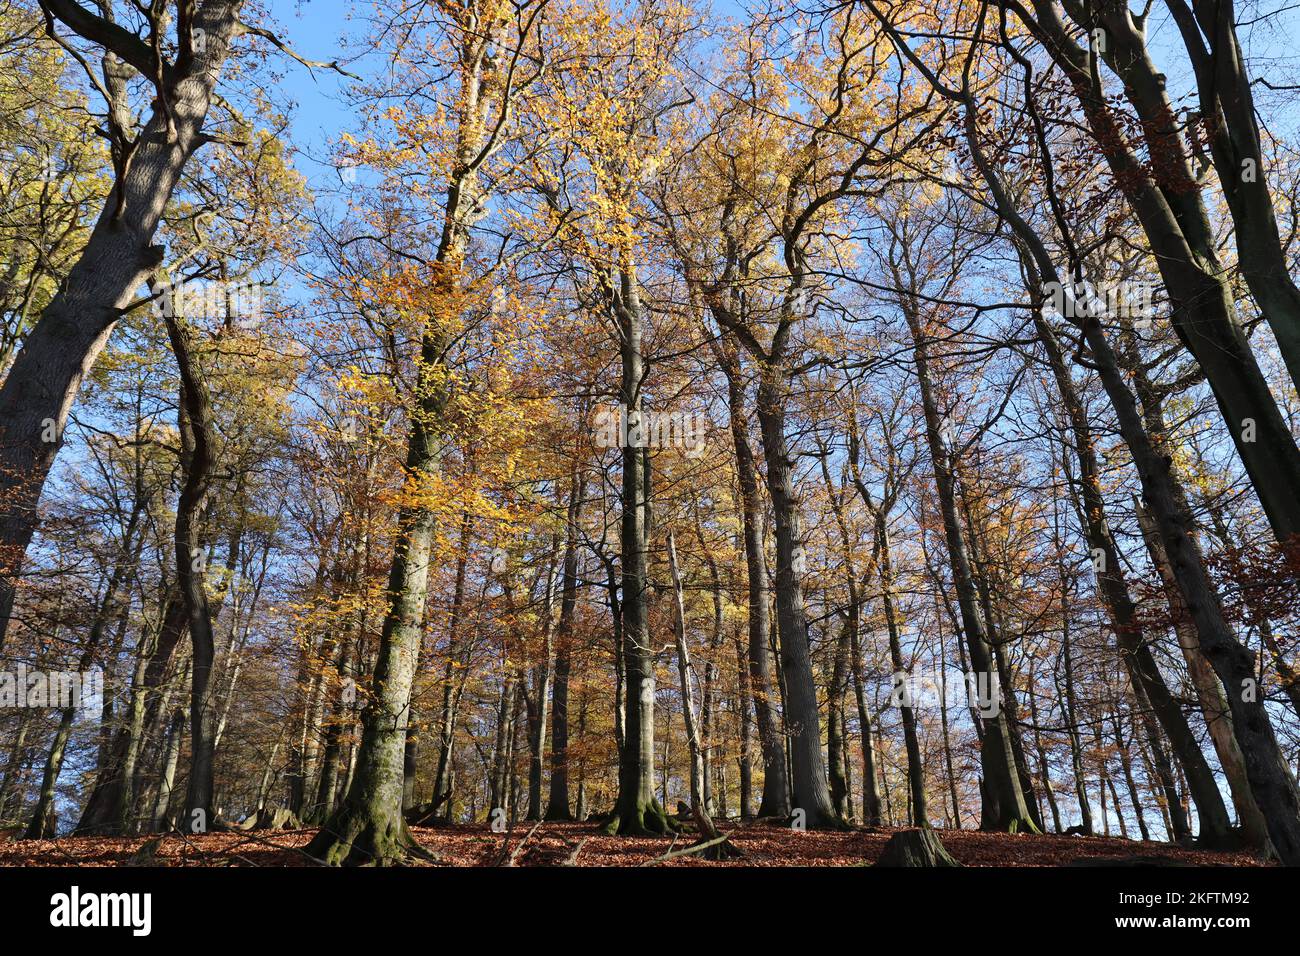 Wide-angle view of a beautiful sunlit autumn forest Stock Photo